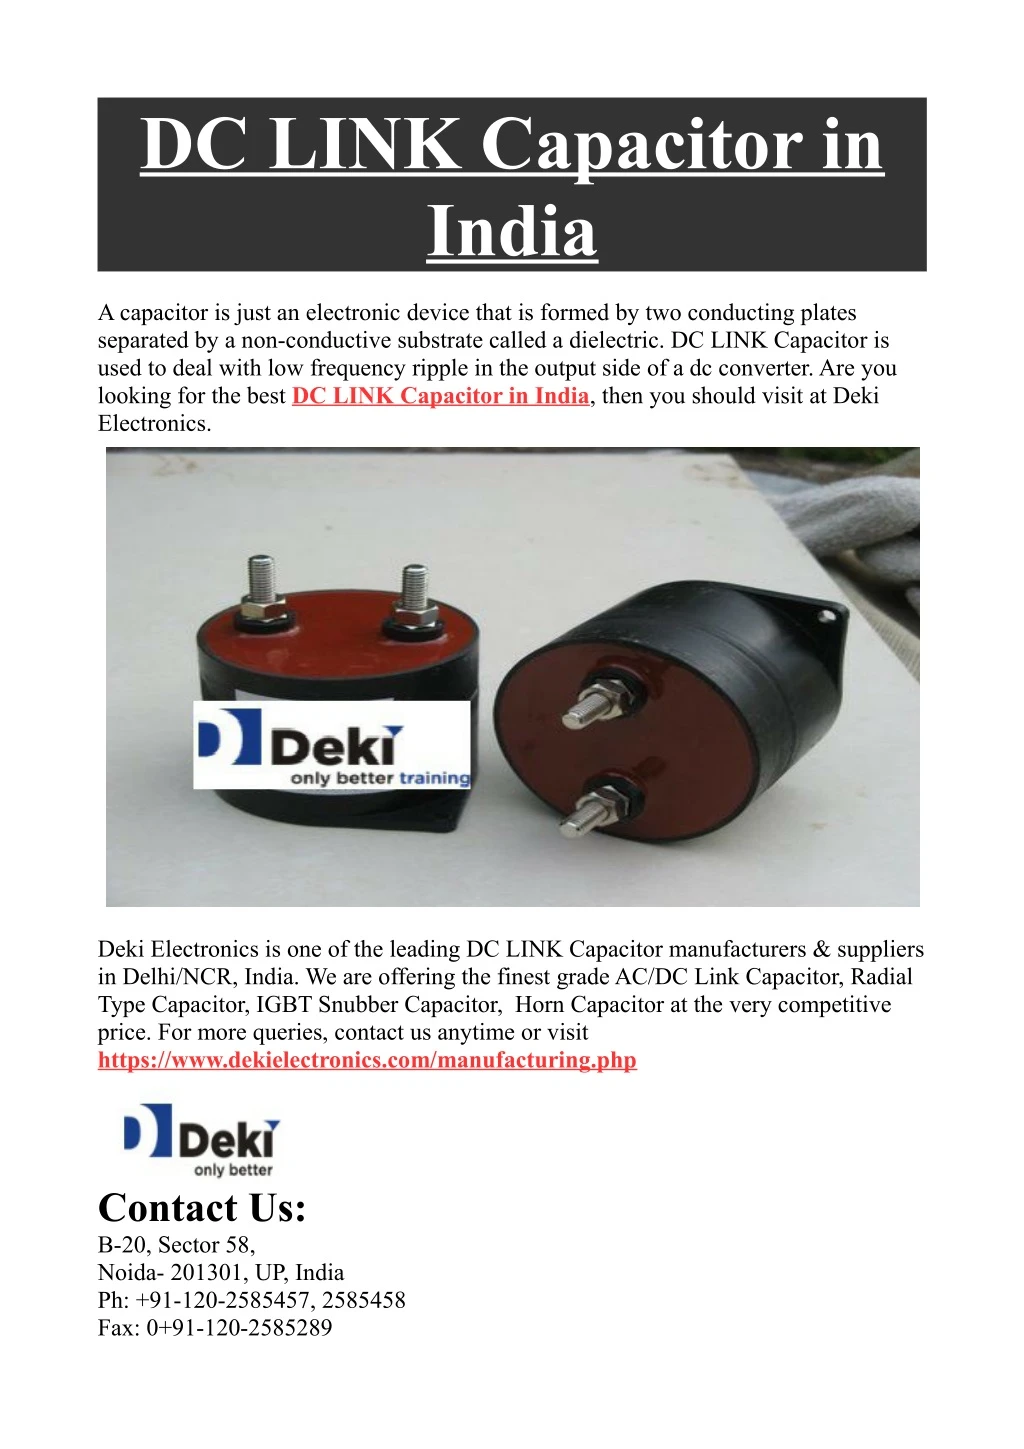 dc link capacitor in india